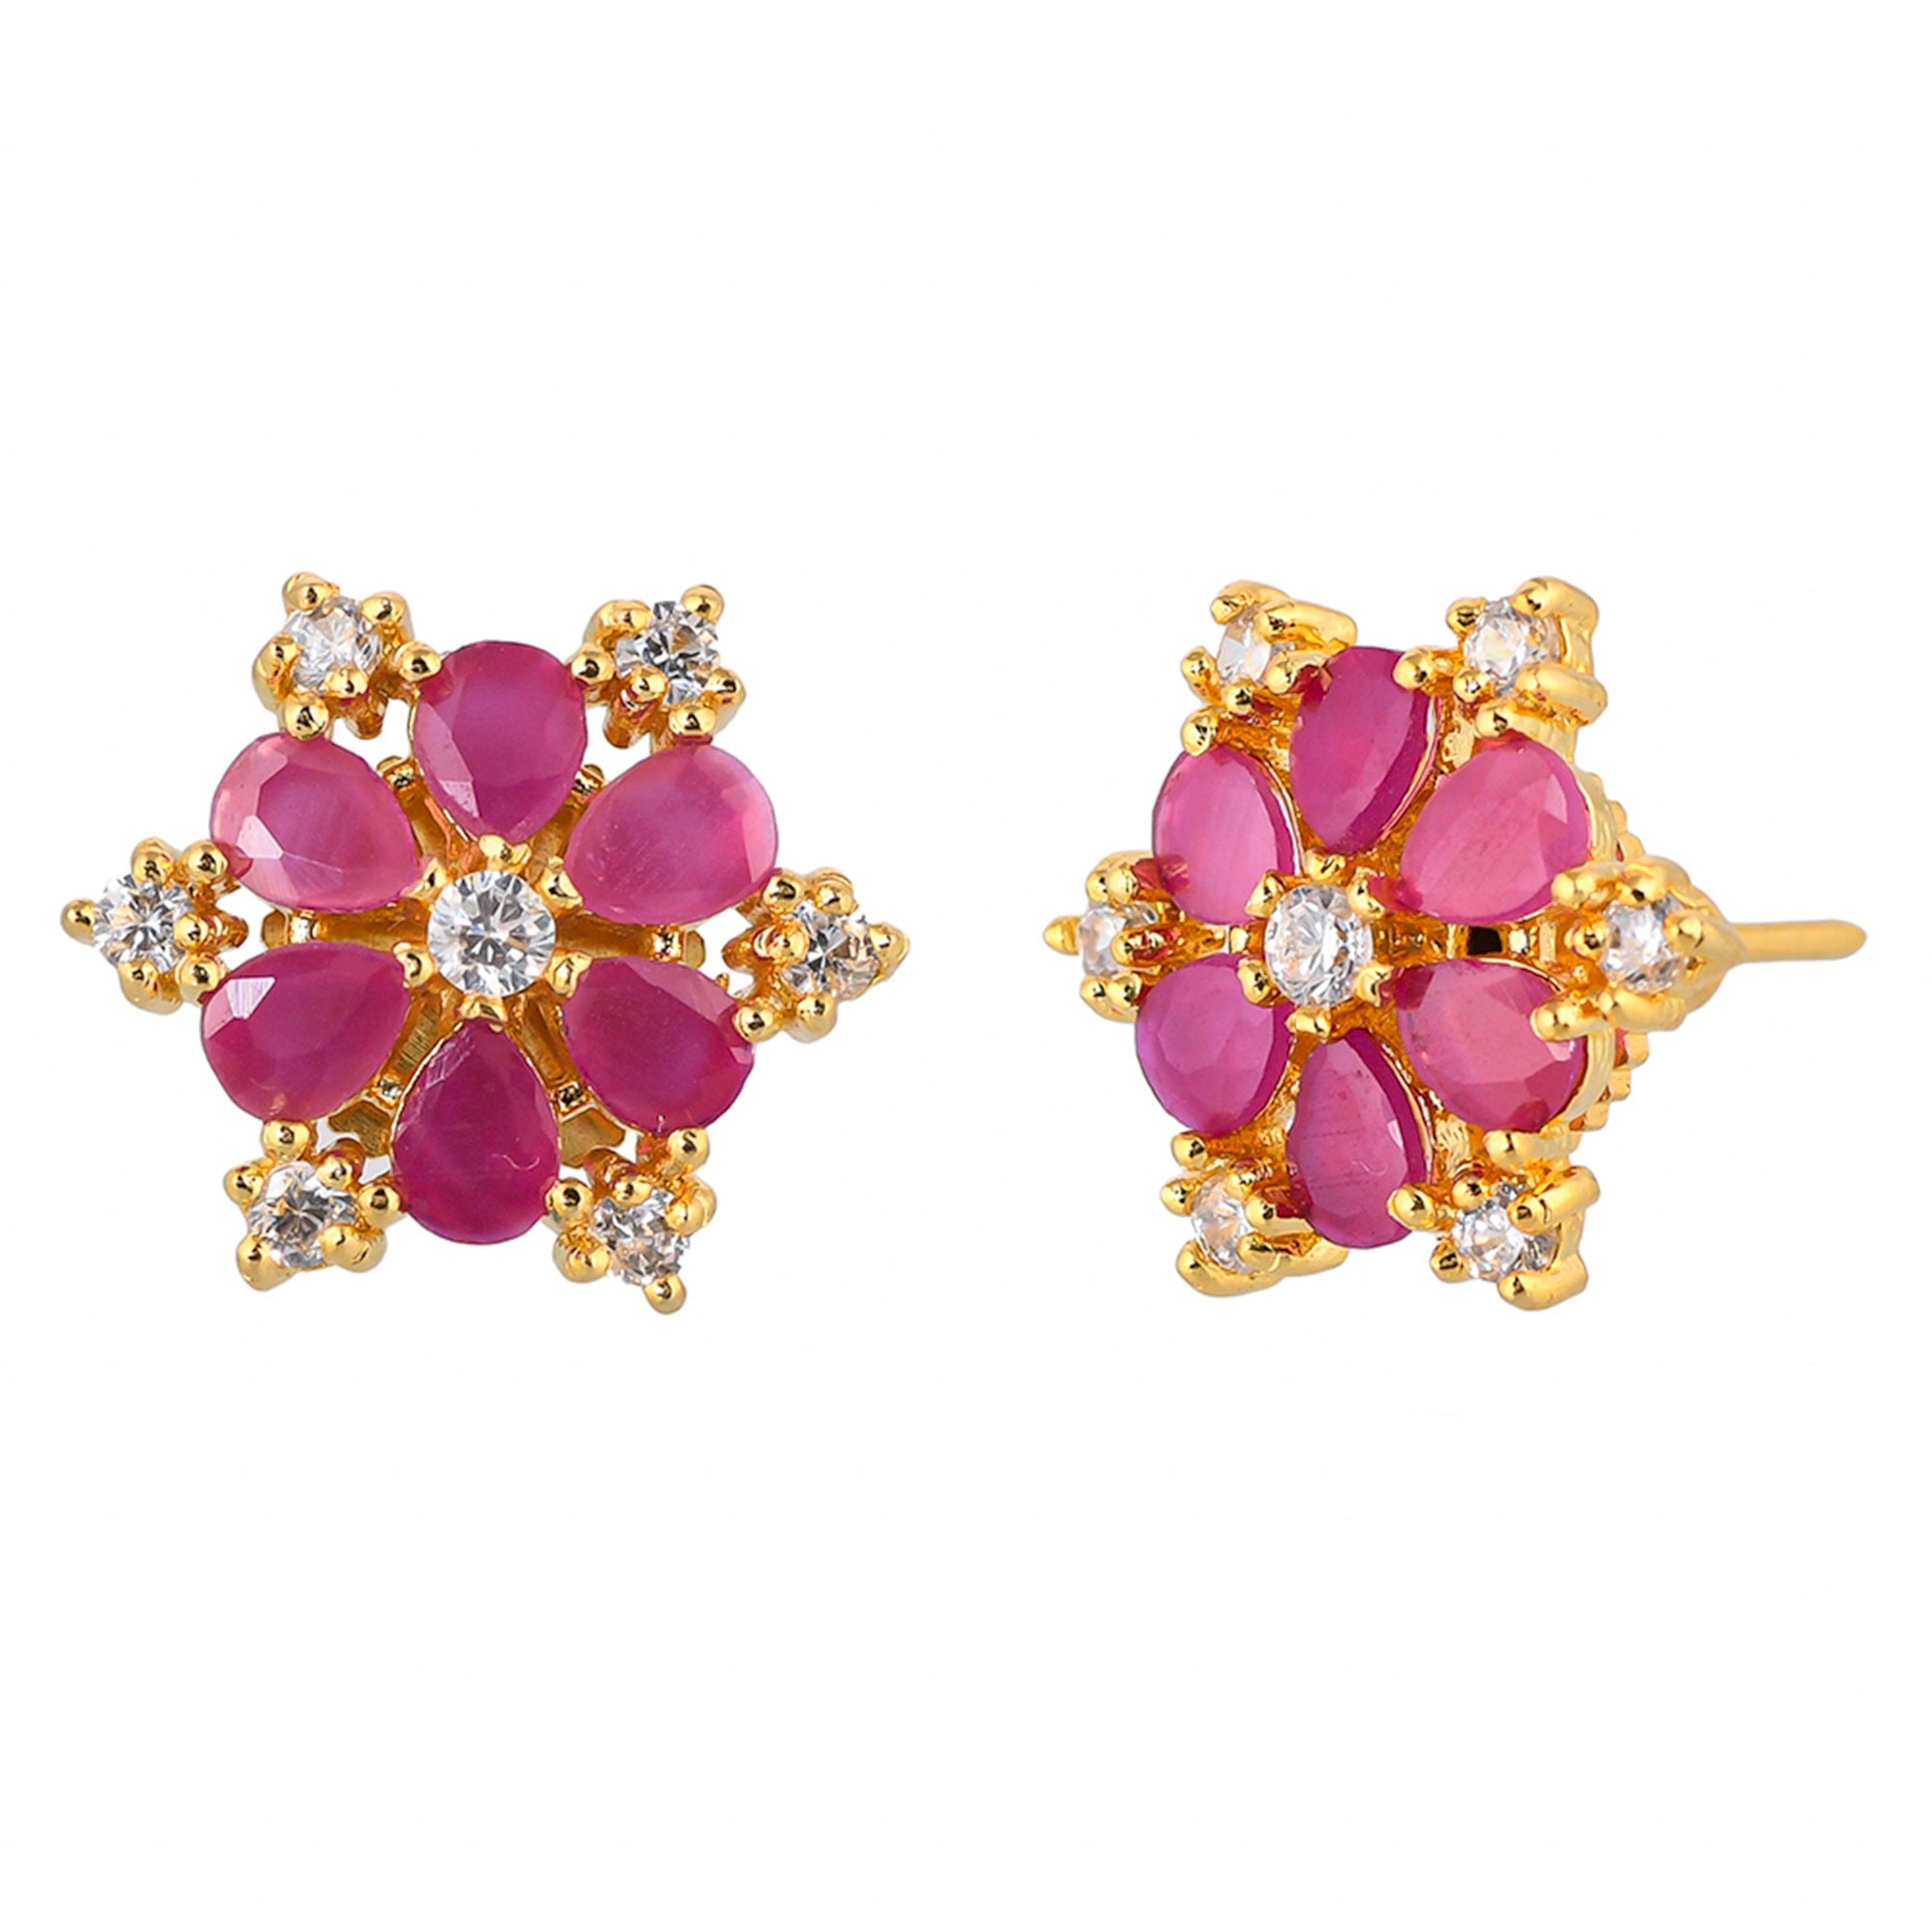 Women's Teardrop And Round Cut Pink And White Cz Gems Stud Earrings - Voylla